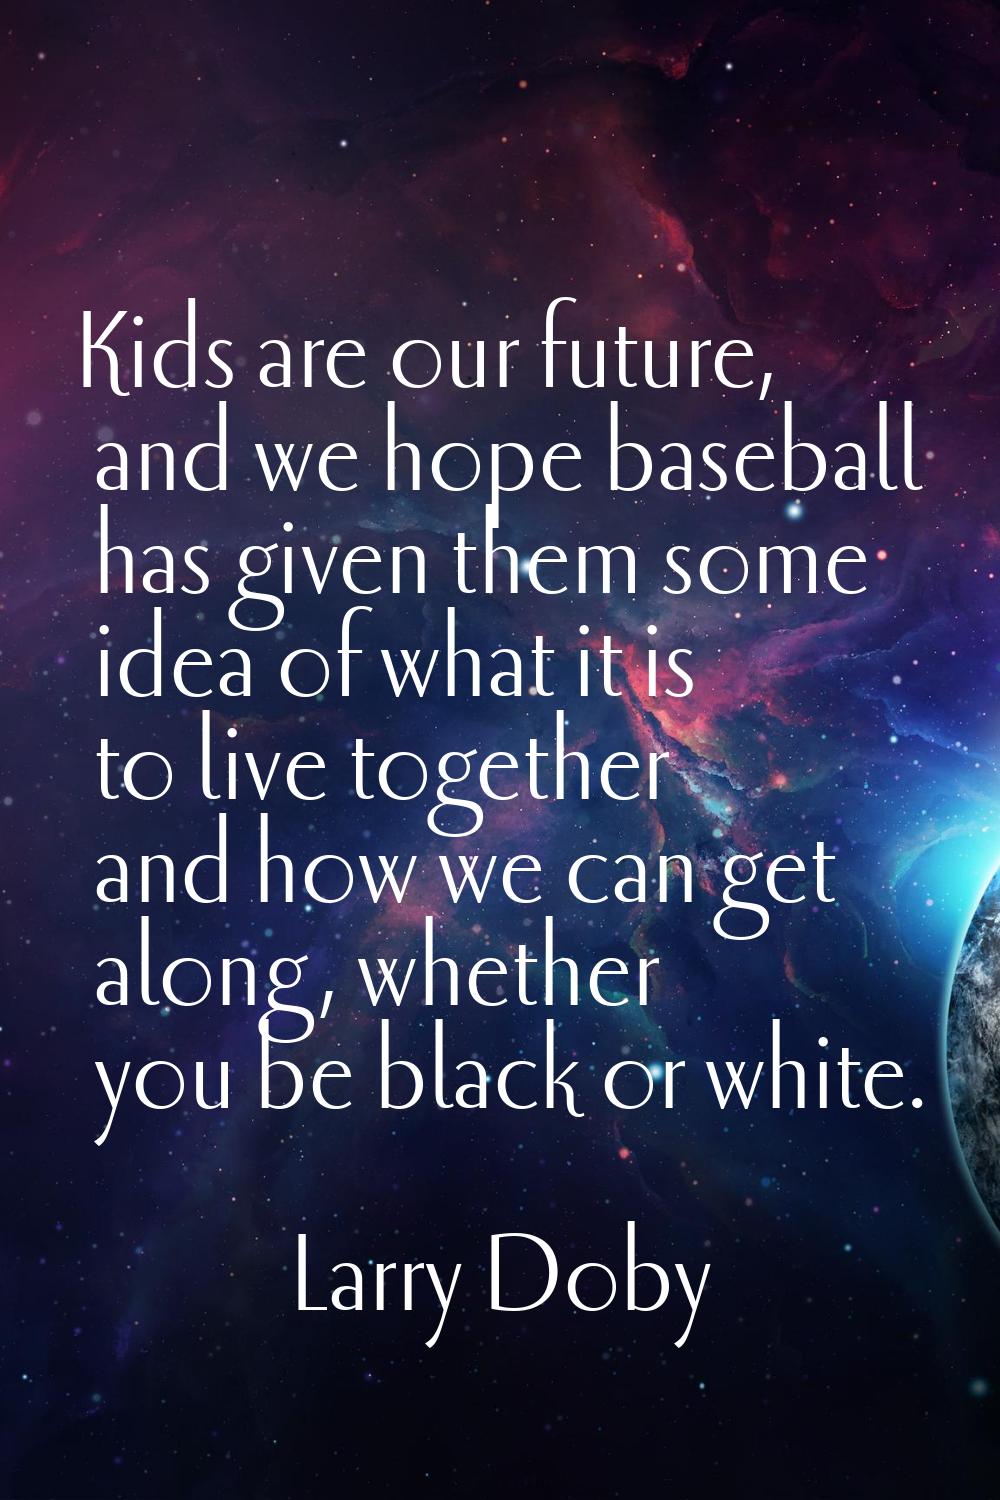 Kids are our future, and we hope baseball has given them some idea of what it is to live together a